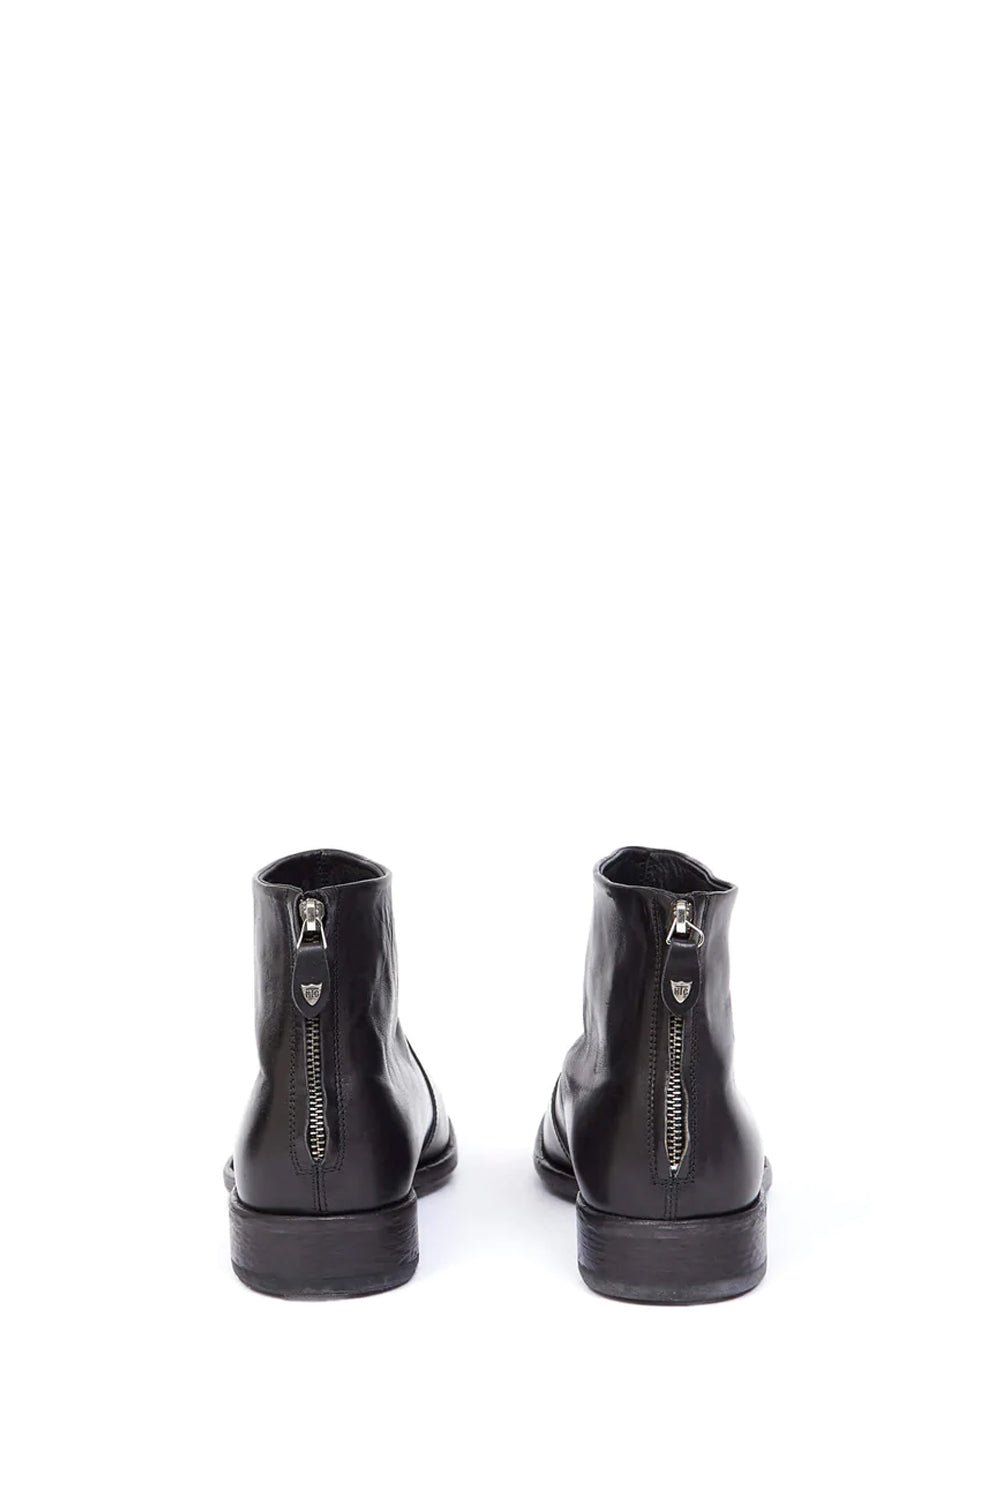 OFFICER ZIP BOOT Black leather boots, leather sole, side zip closure. made in Italy. HTC LOS ANGELES